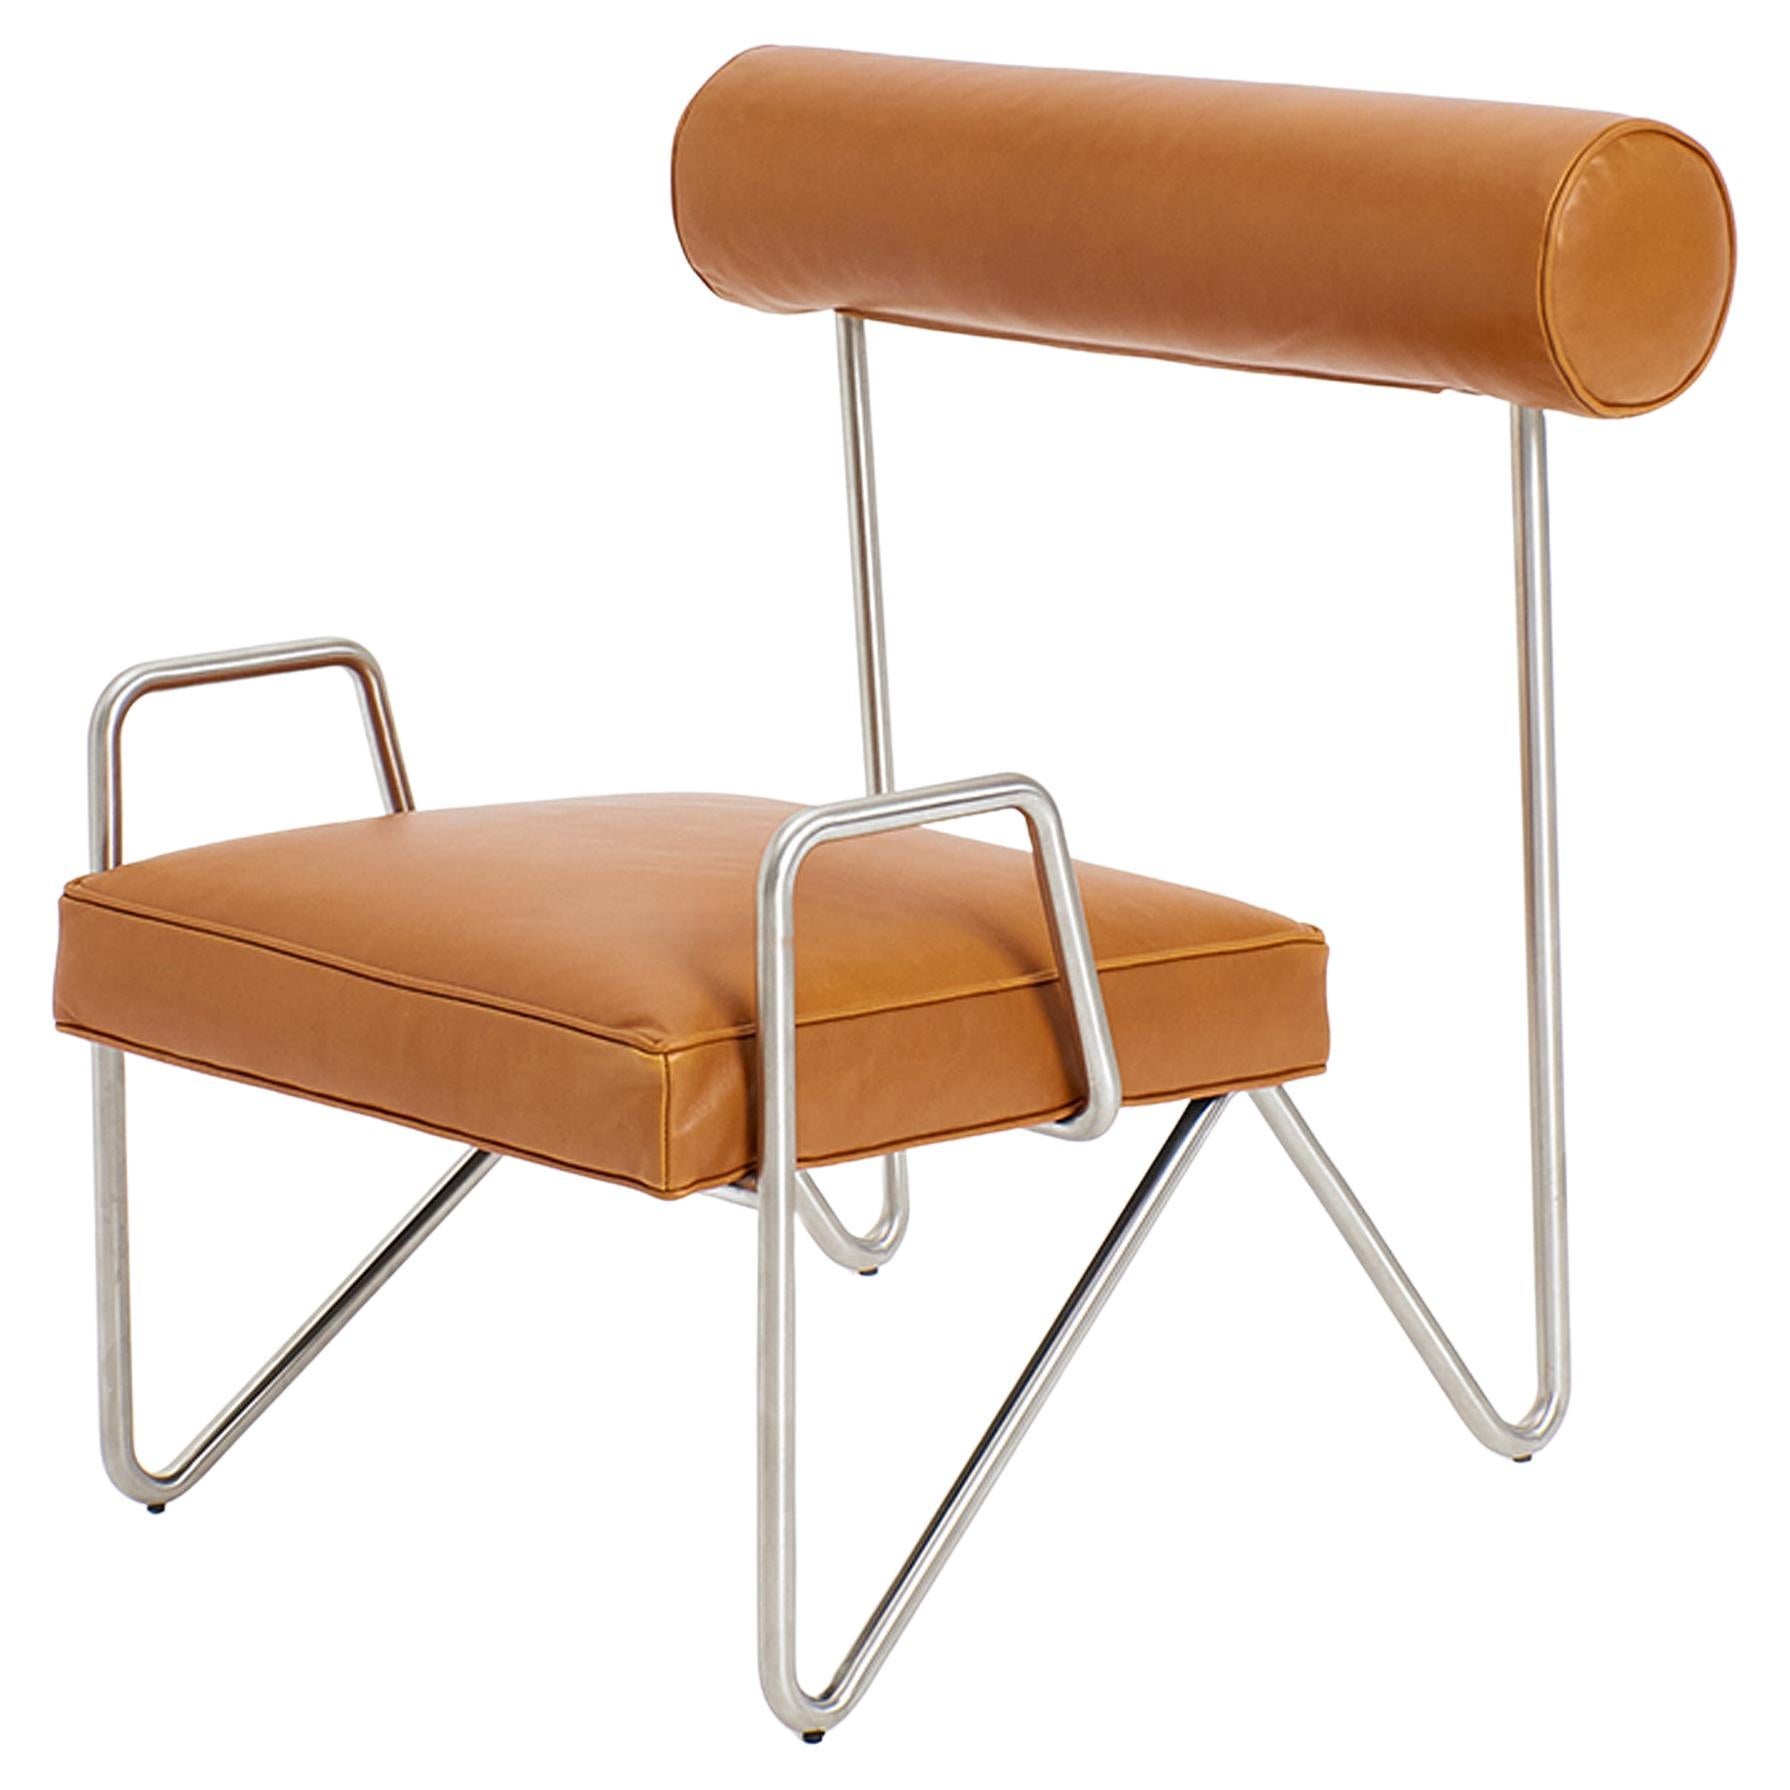 Larry's Lounge Chair in Tan Leather